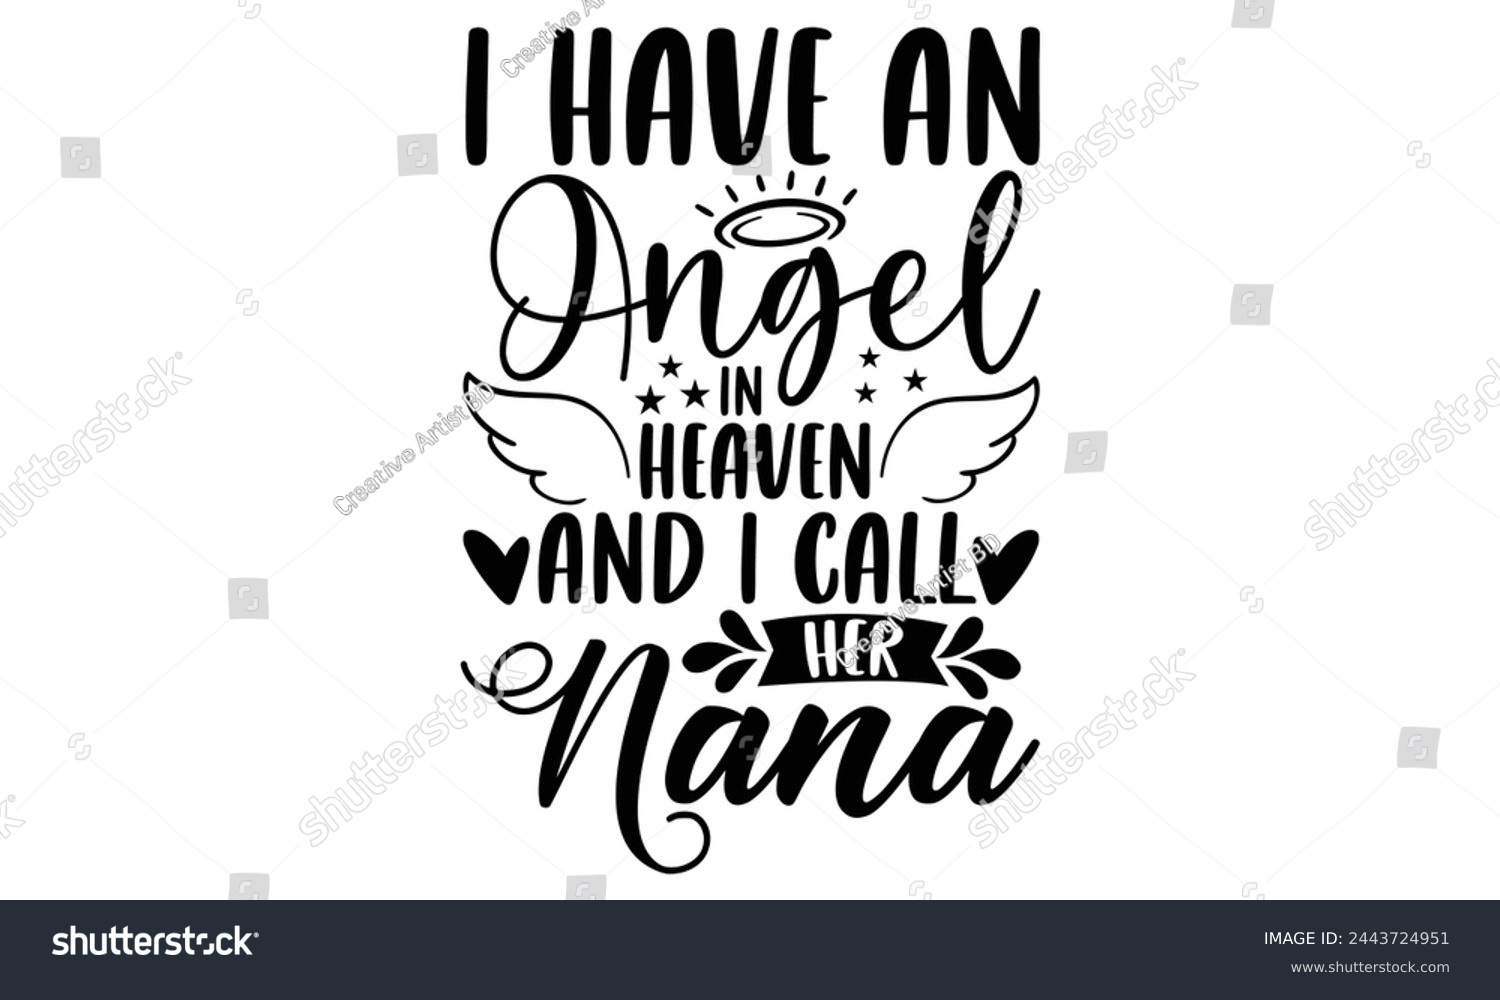 SVG of I Have An Angel In Heaven And I Call Her Nana - Memorial T shirt Design, Handmade calligraphy vector illustration, Typography Vector for poster, banner, flyer and mug. svg